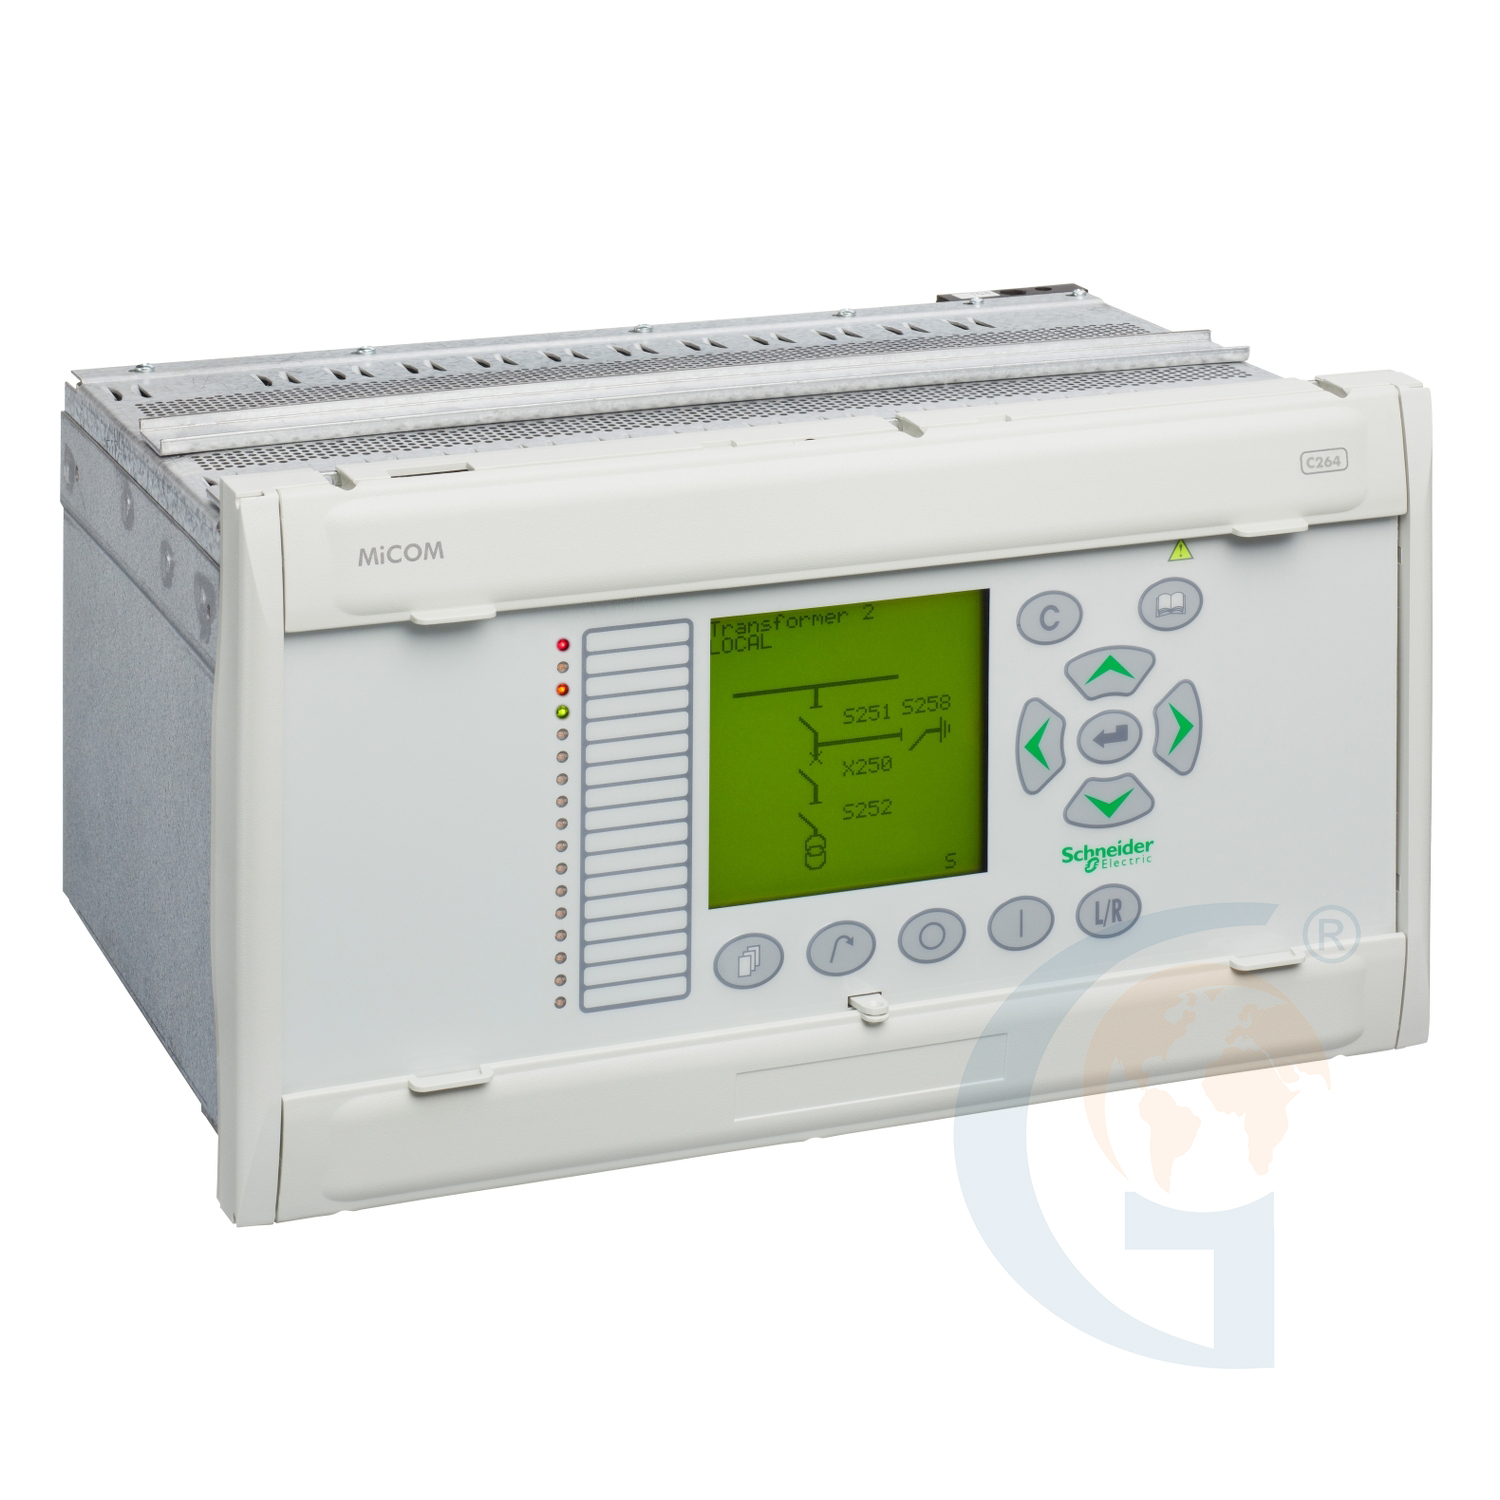 Schneider Electric C264T3-------0---- MICOM C264 60T LCD – BAY CONTROLLERS AND RTUS https://gesrepair.com/wp-content/uploads/2020/Schneider/Schneider_Electric_C264T3-------0----_.jpg